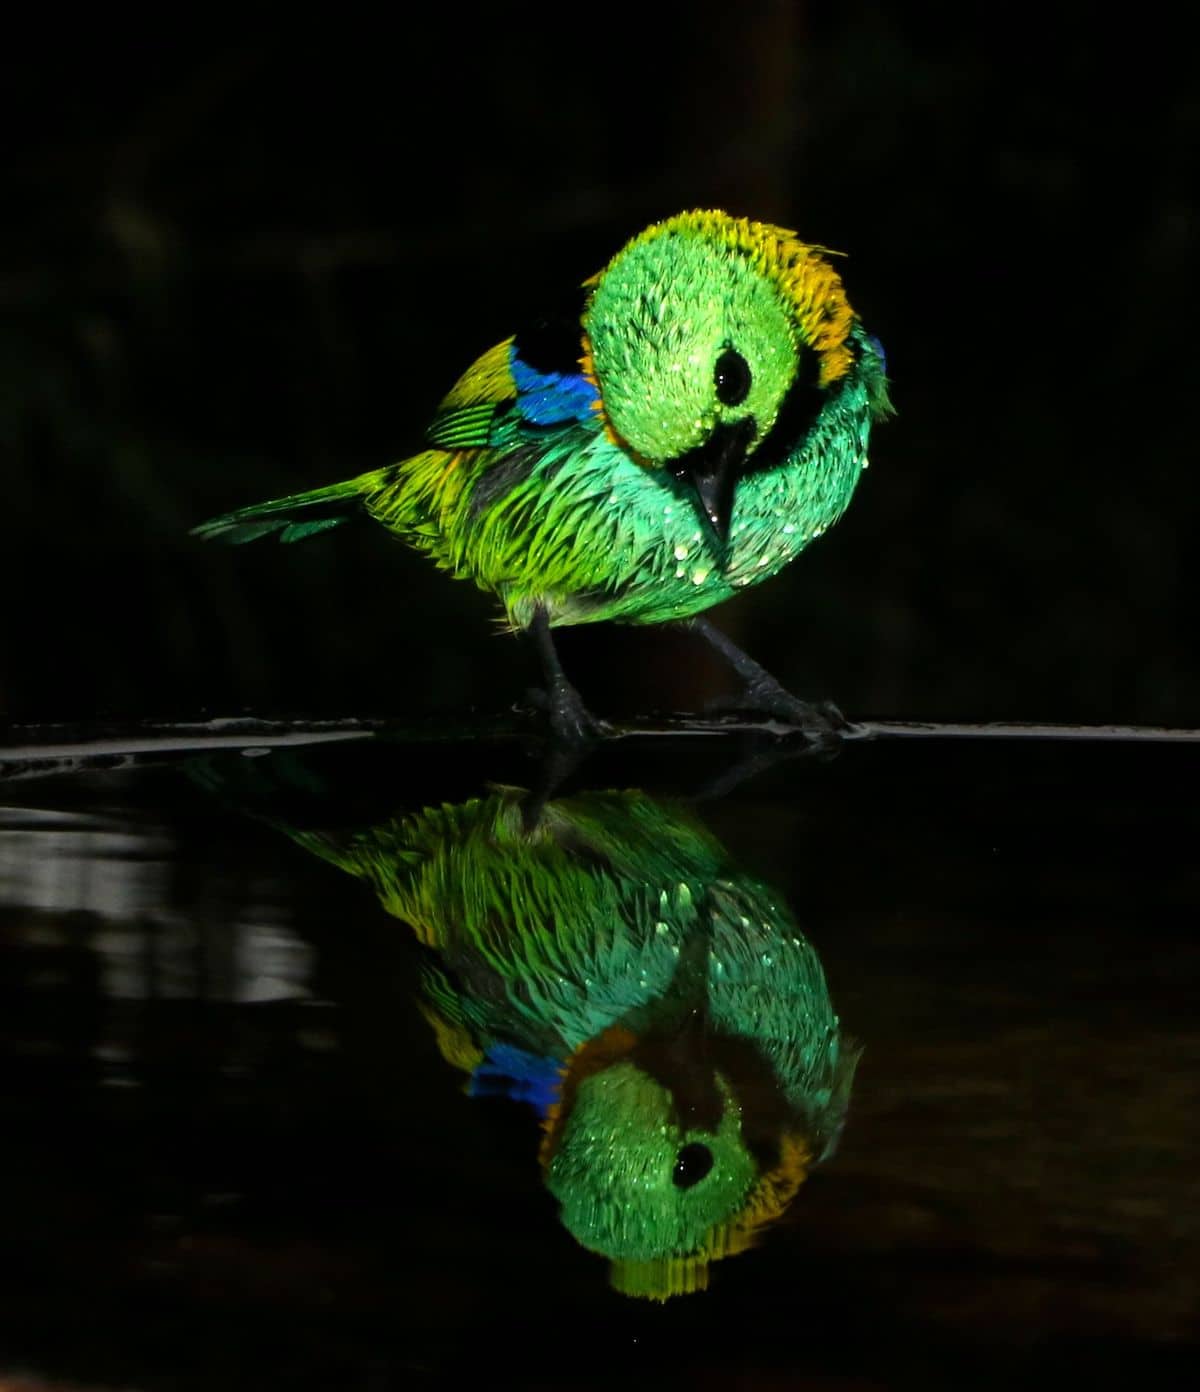 Bird Photography by Christian Spencer